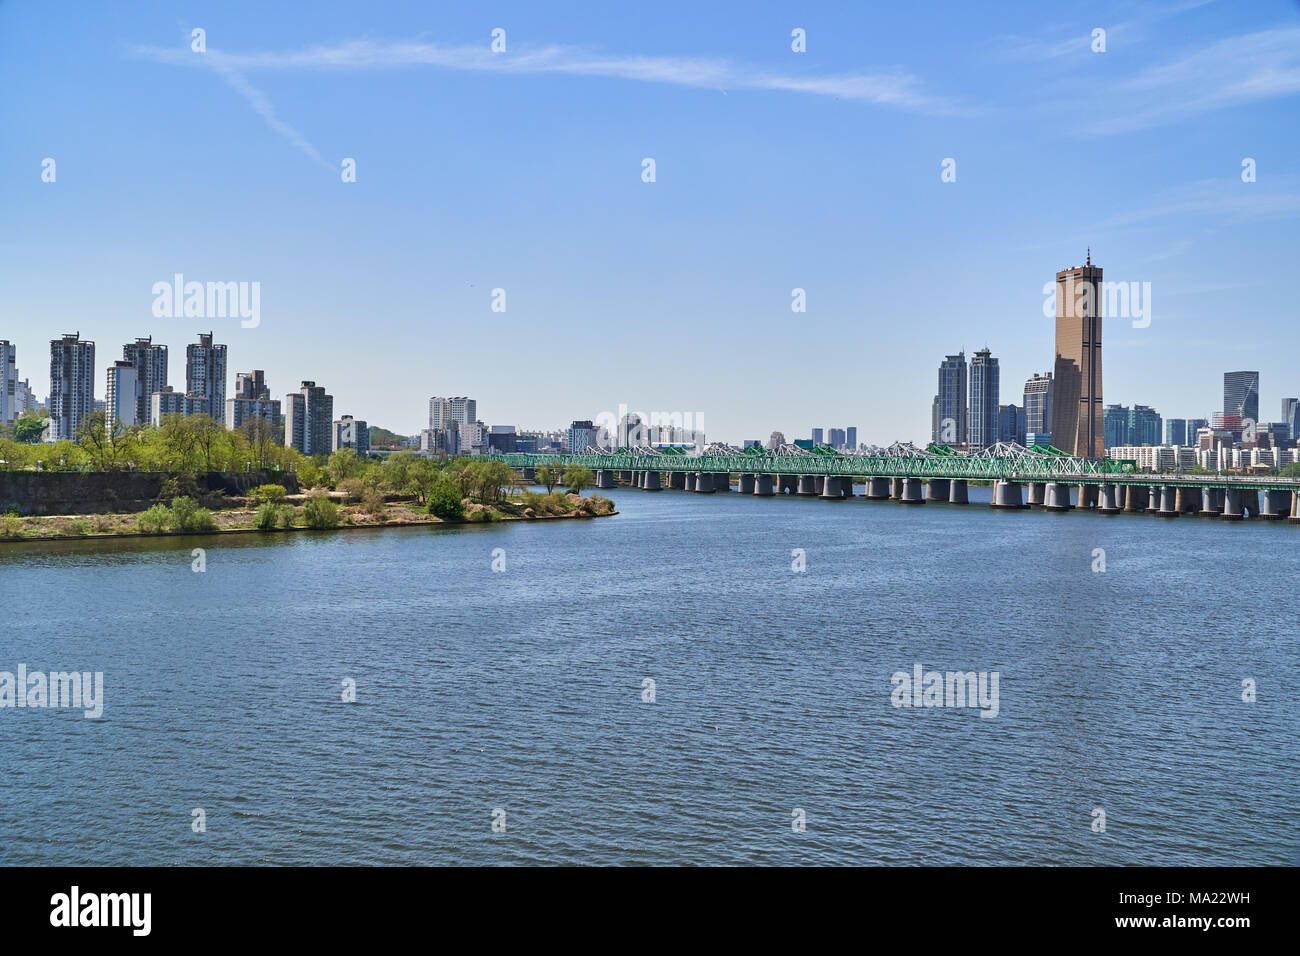 Cityscape of Yeouido in Seoul, with Hangang railway bridge, Han-river and 63 building. Stock Photo